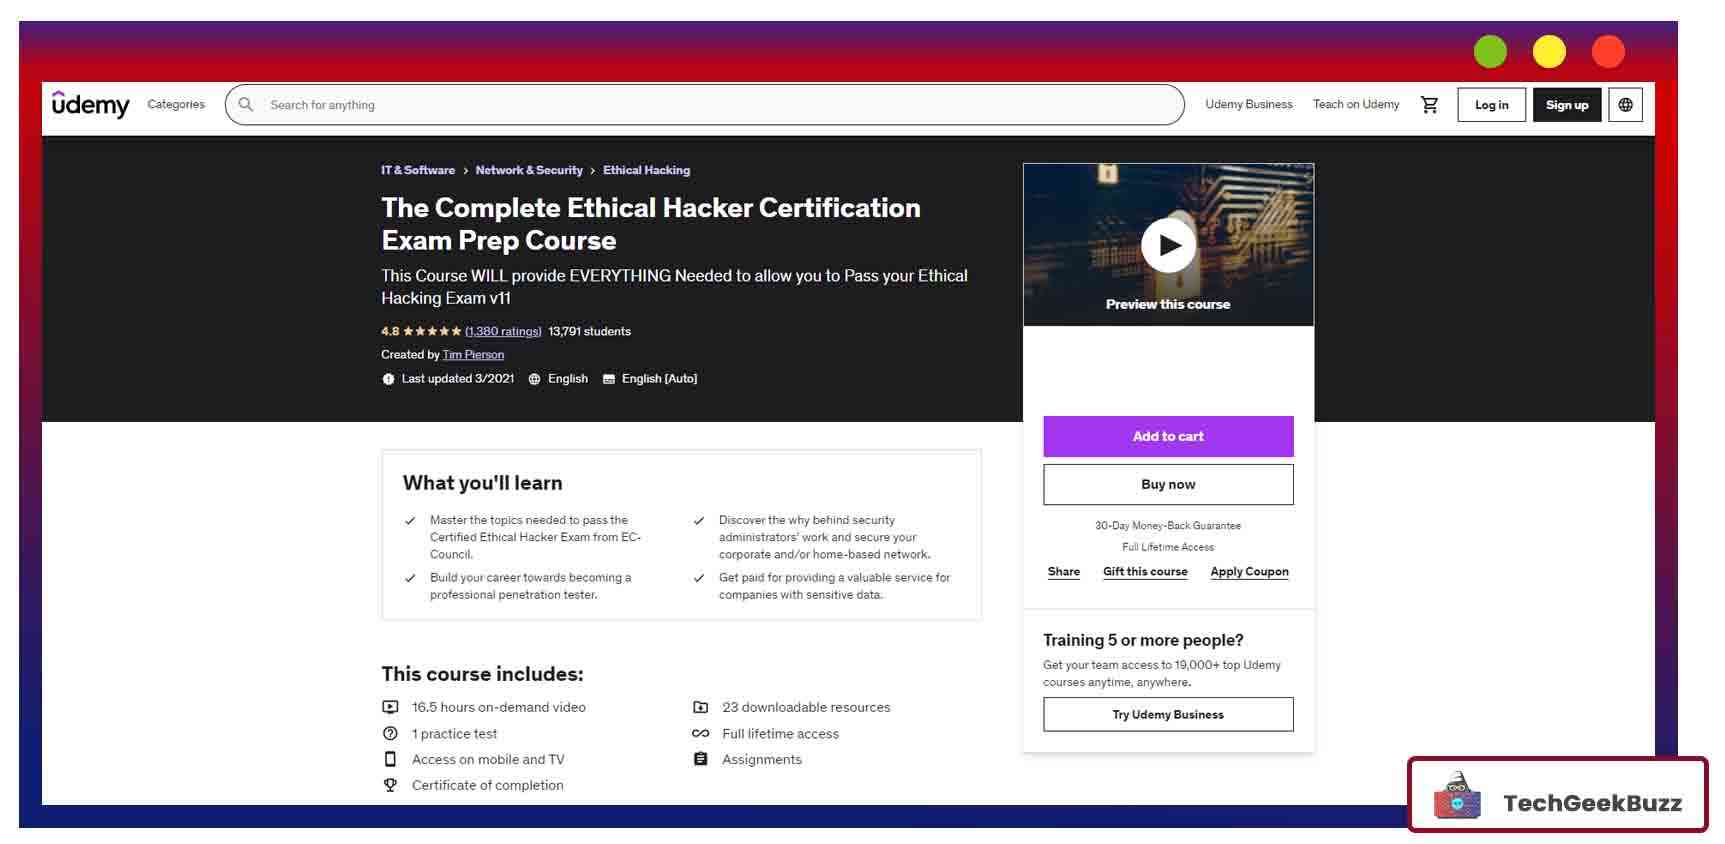 The Complete Ethical Hacker Certification Exam Prep Course